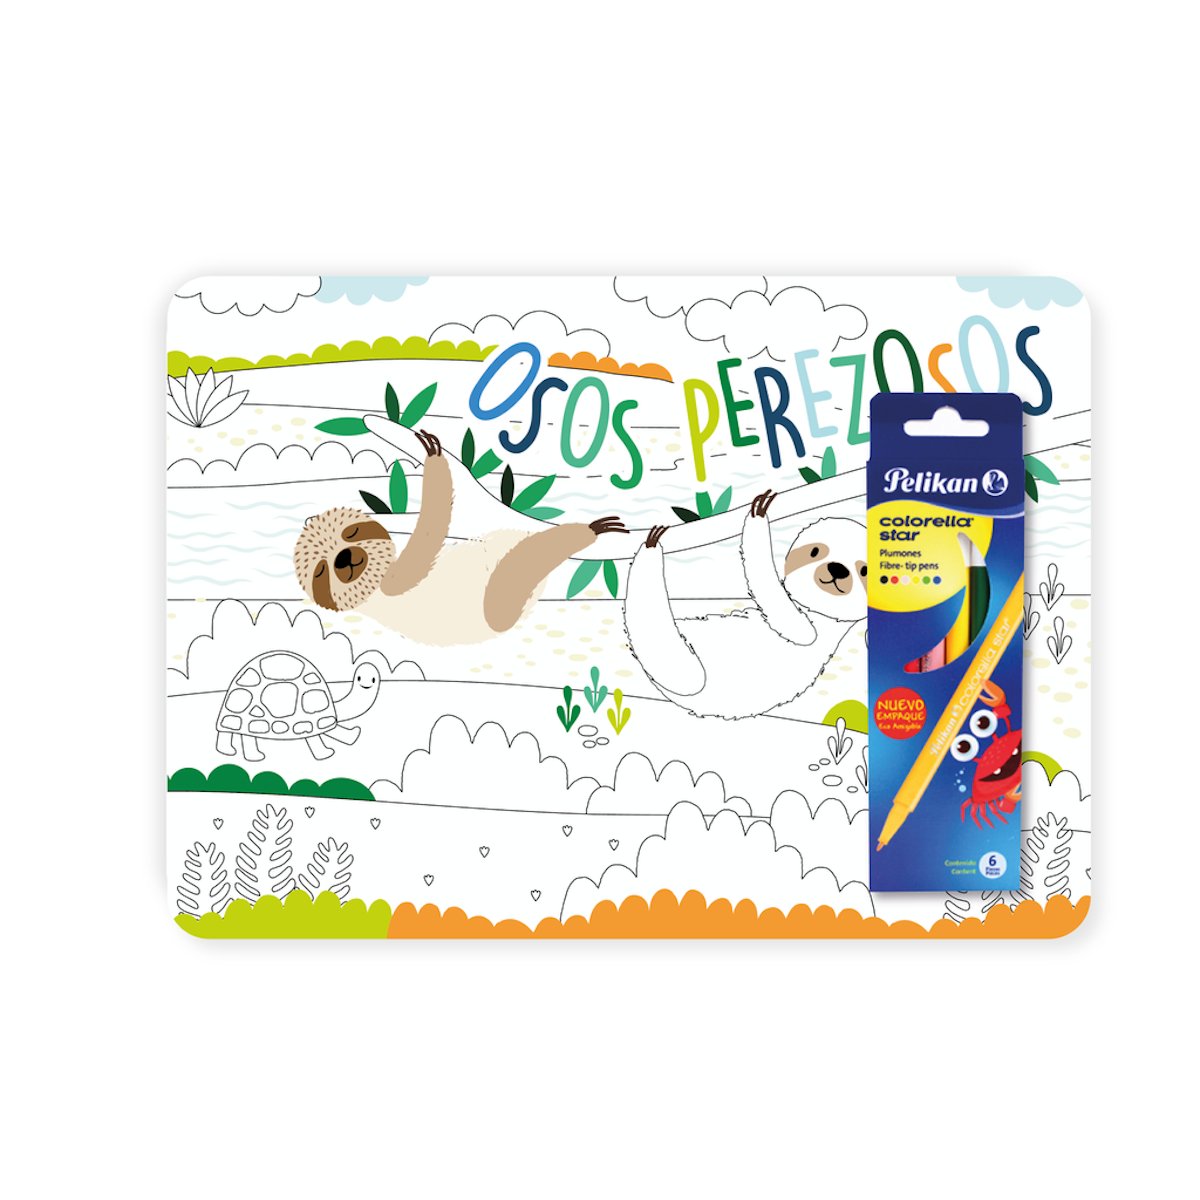 Coloring Placemat & Markers Kit - EVAMAIA